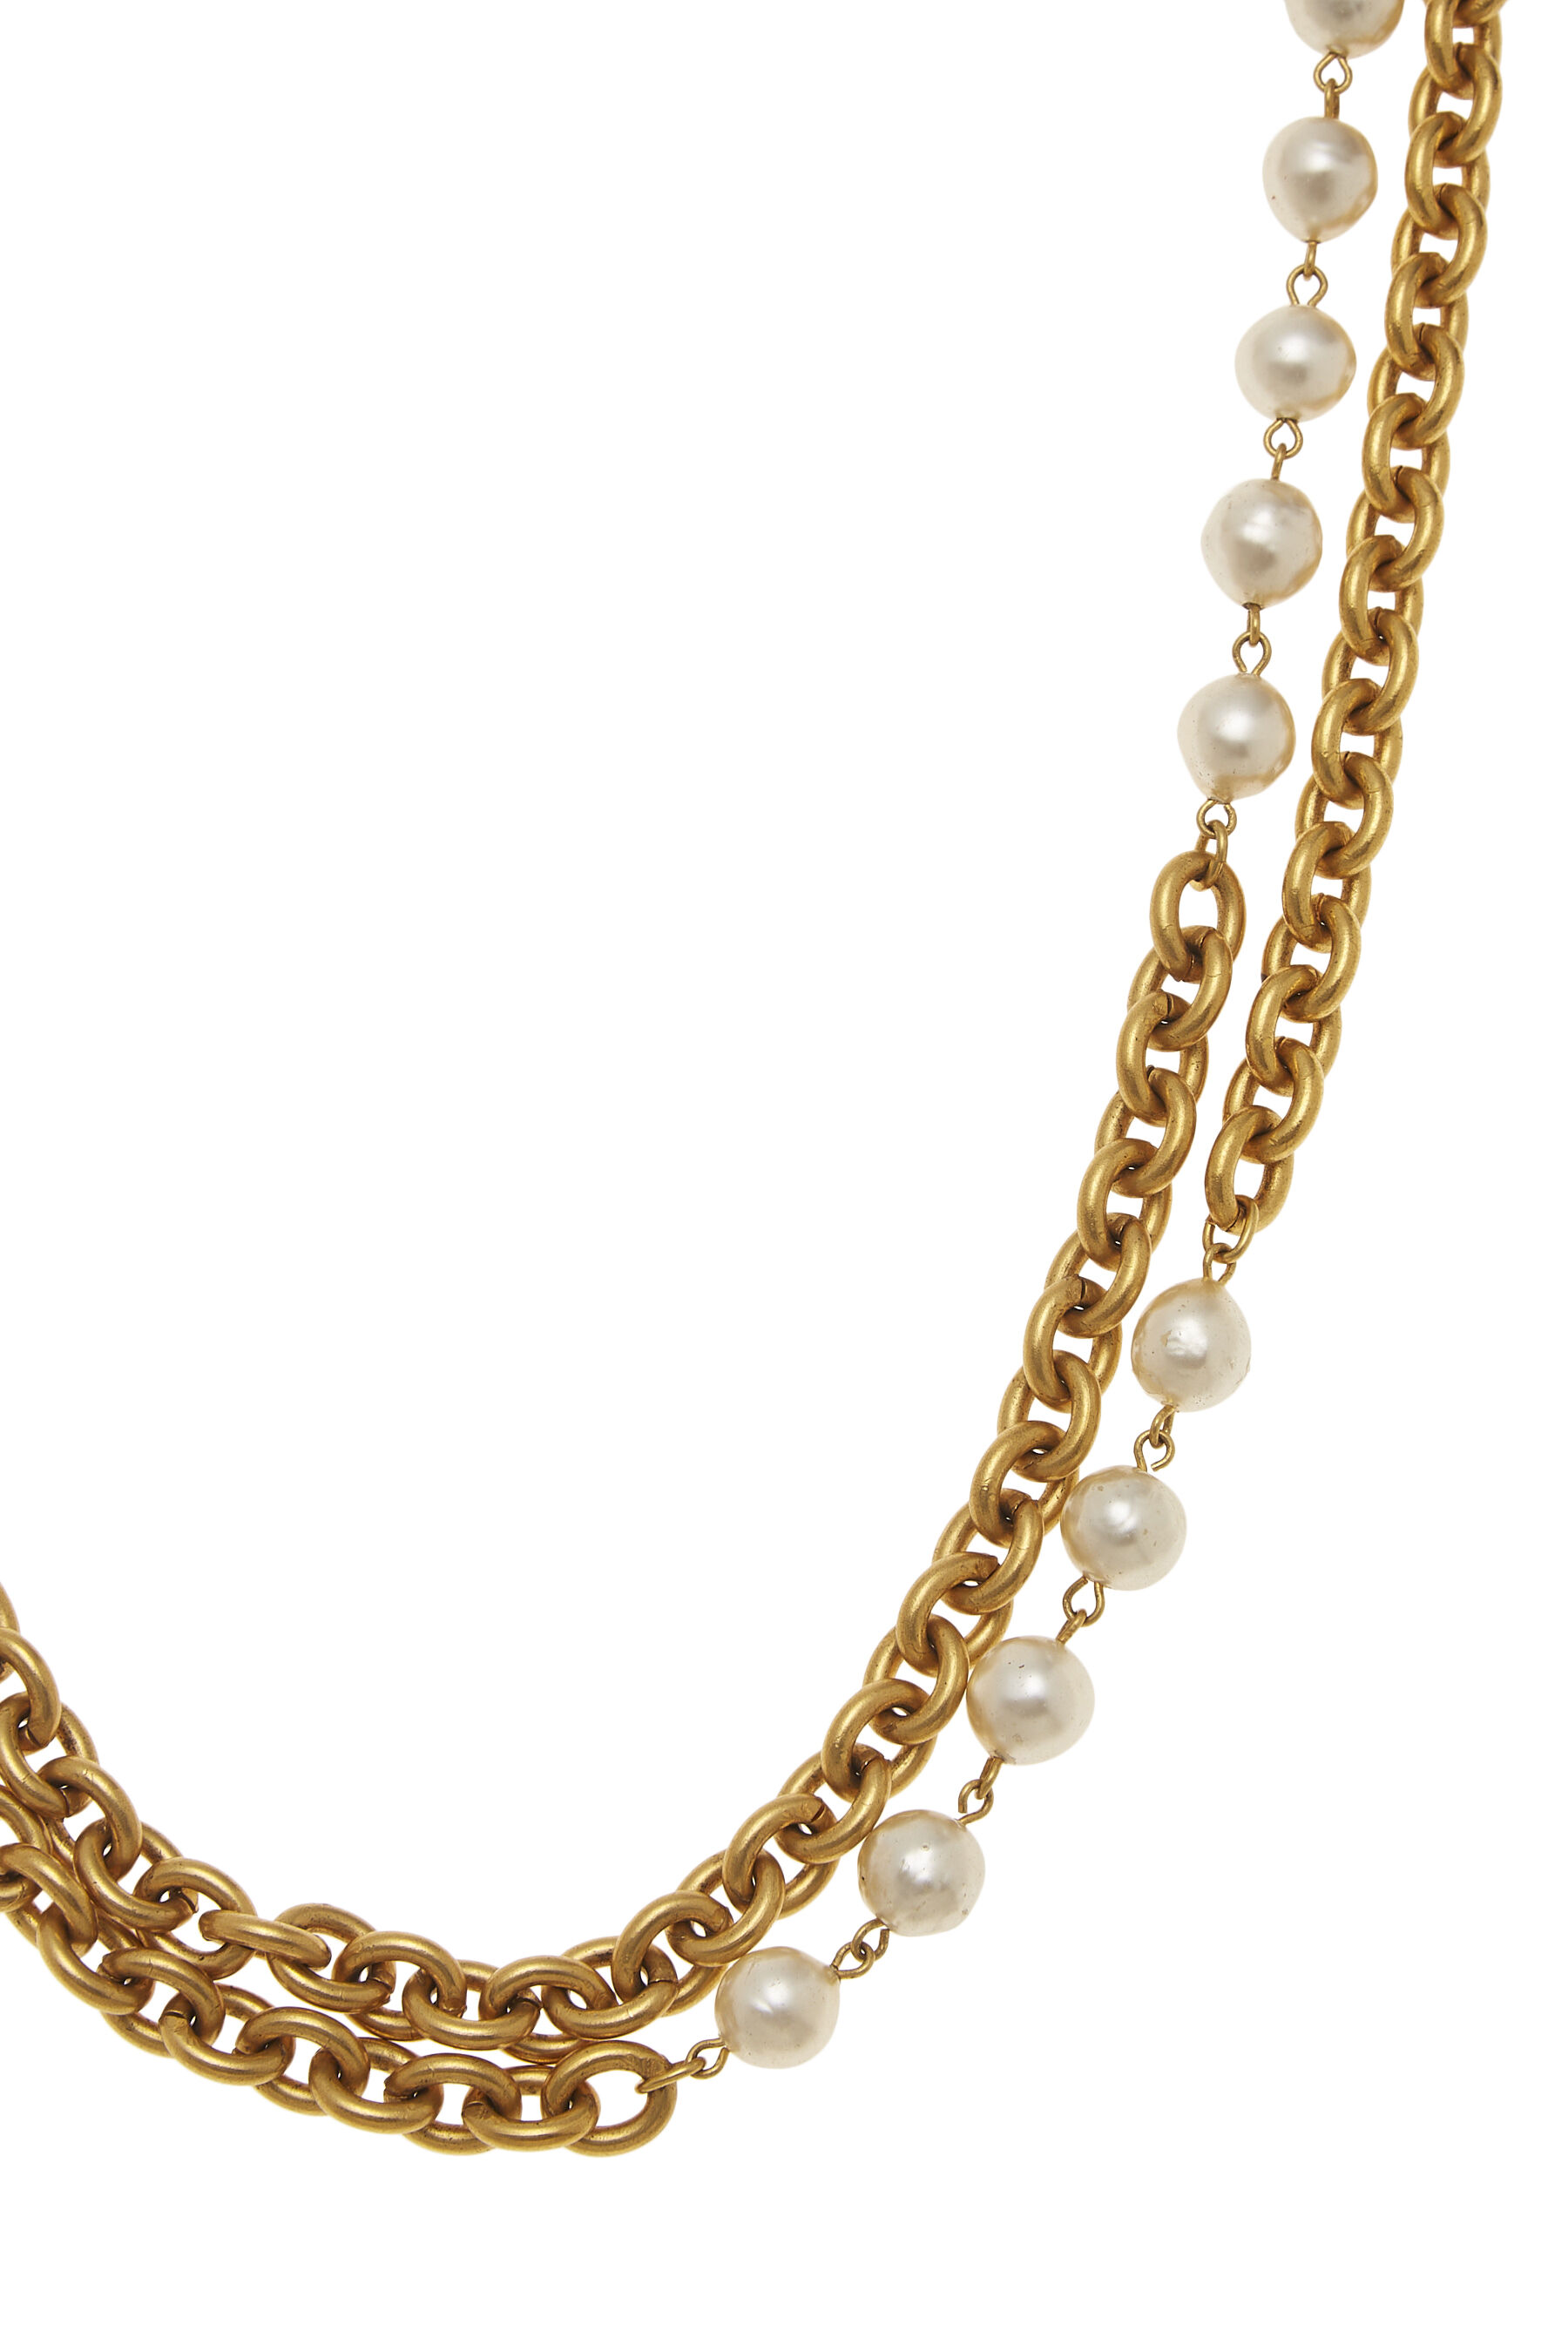 Chanel Gold & Faux Pearl Crystal 'CC' Layered Necklace Q6J3SK28DB001